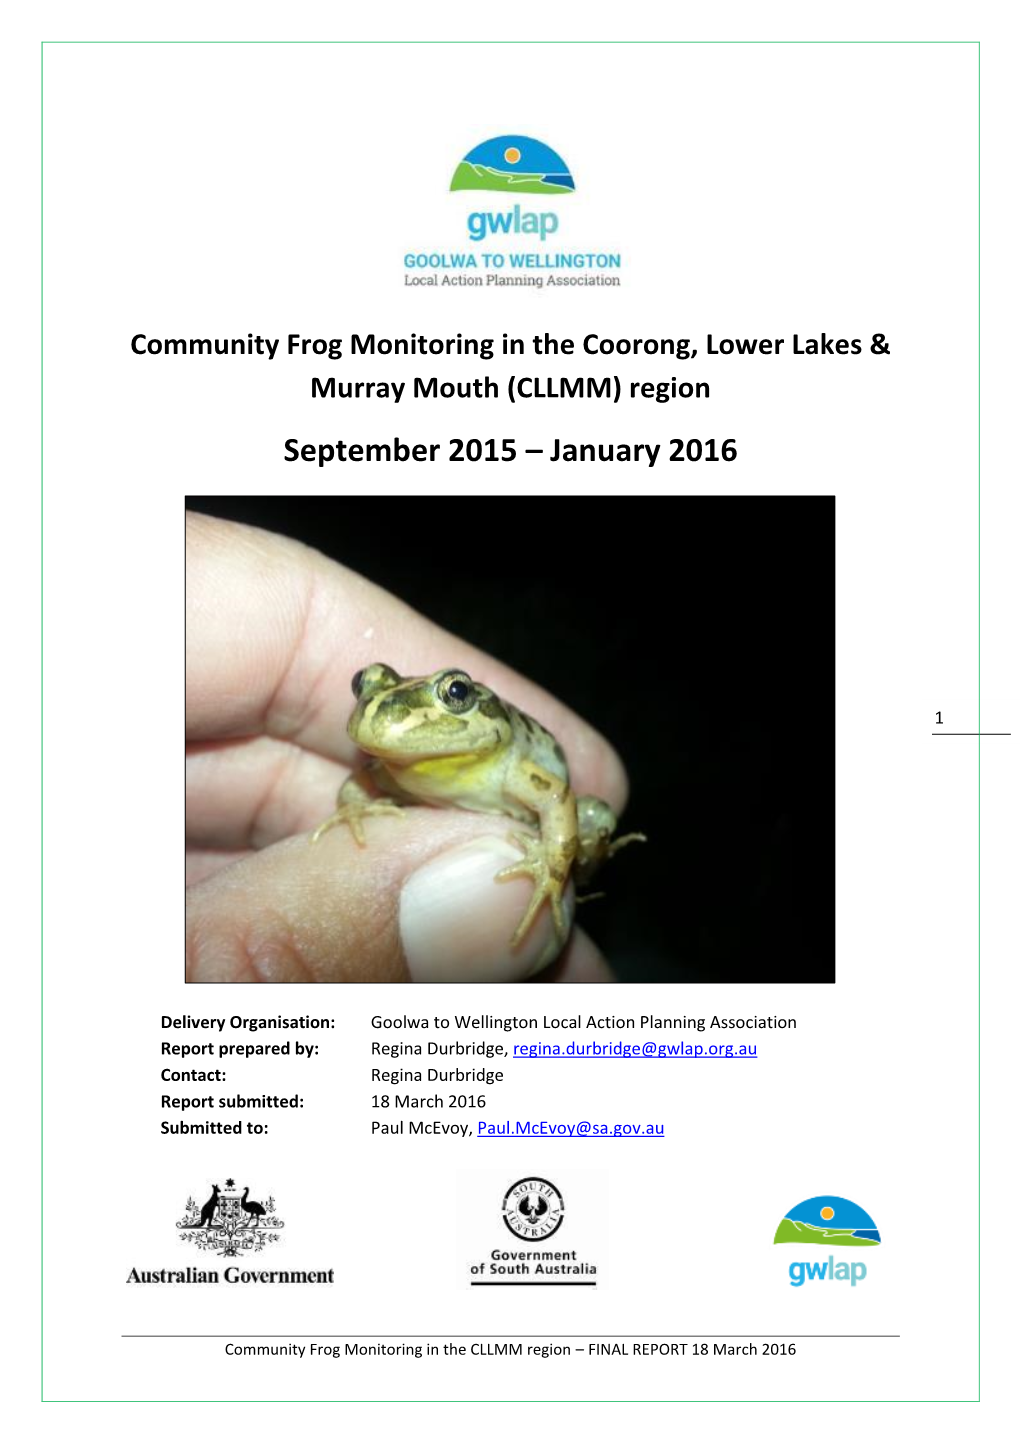 Community Frog Monitoring in the CLLMM Region – FINAL REPORT 18 March 2016